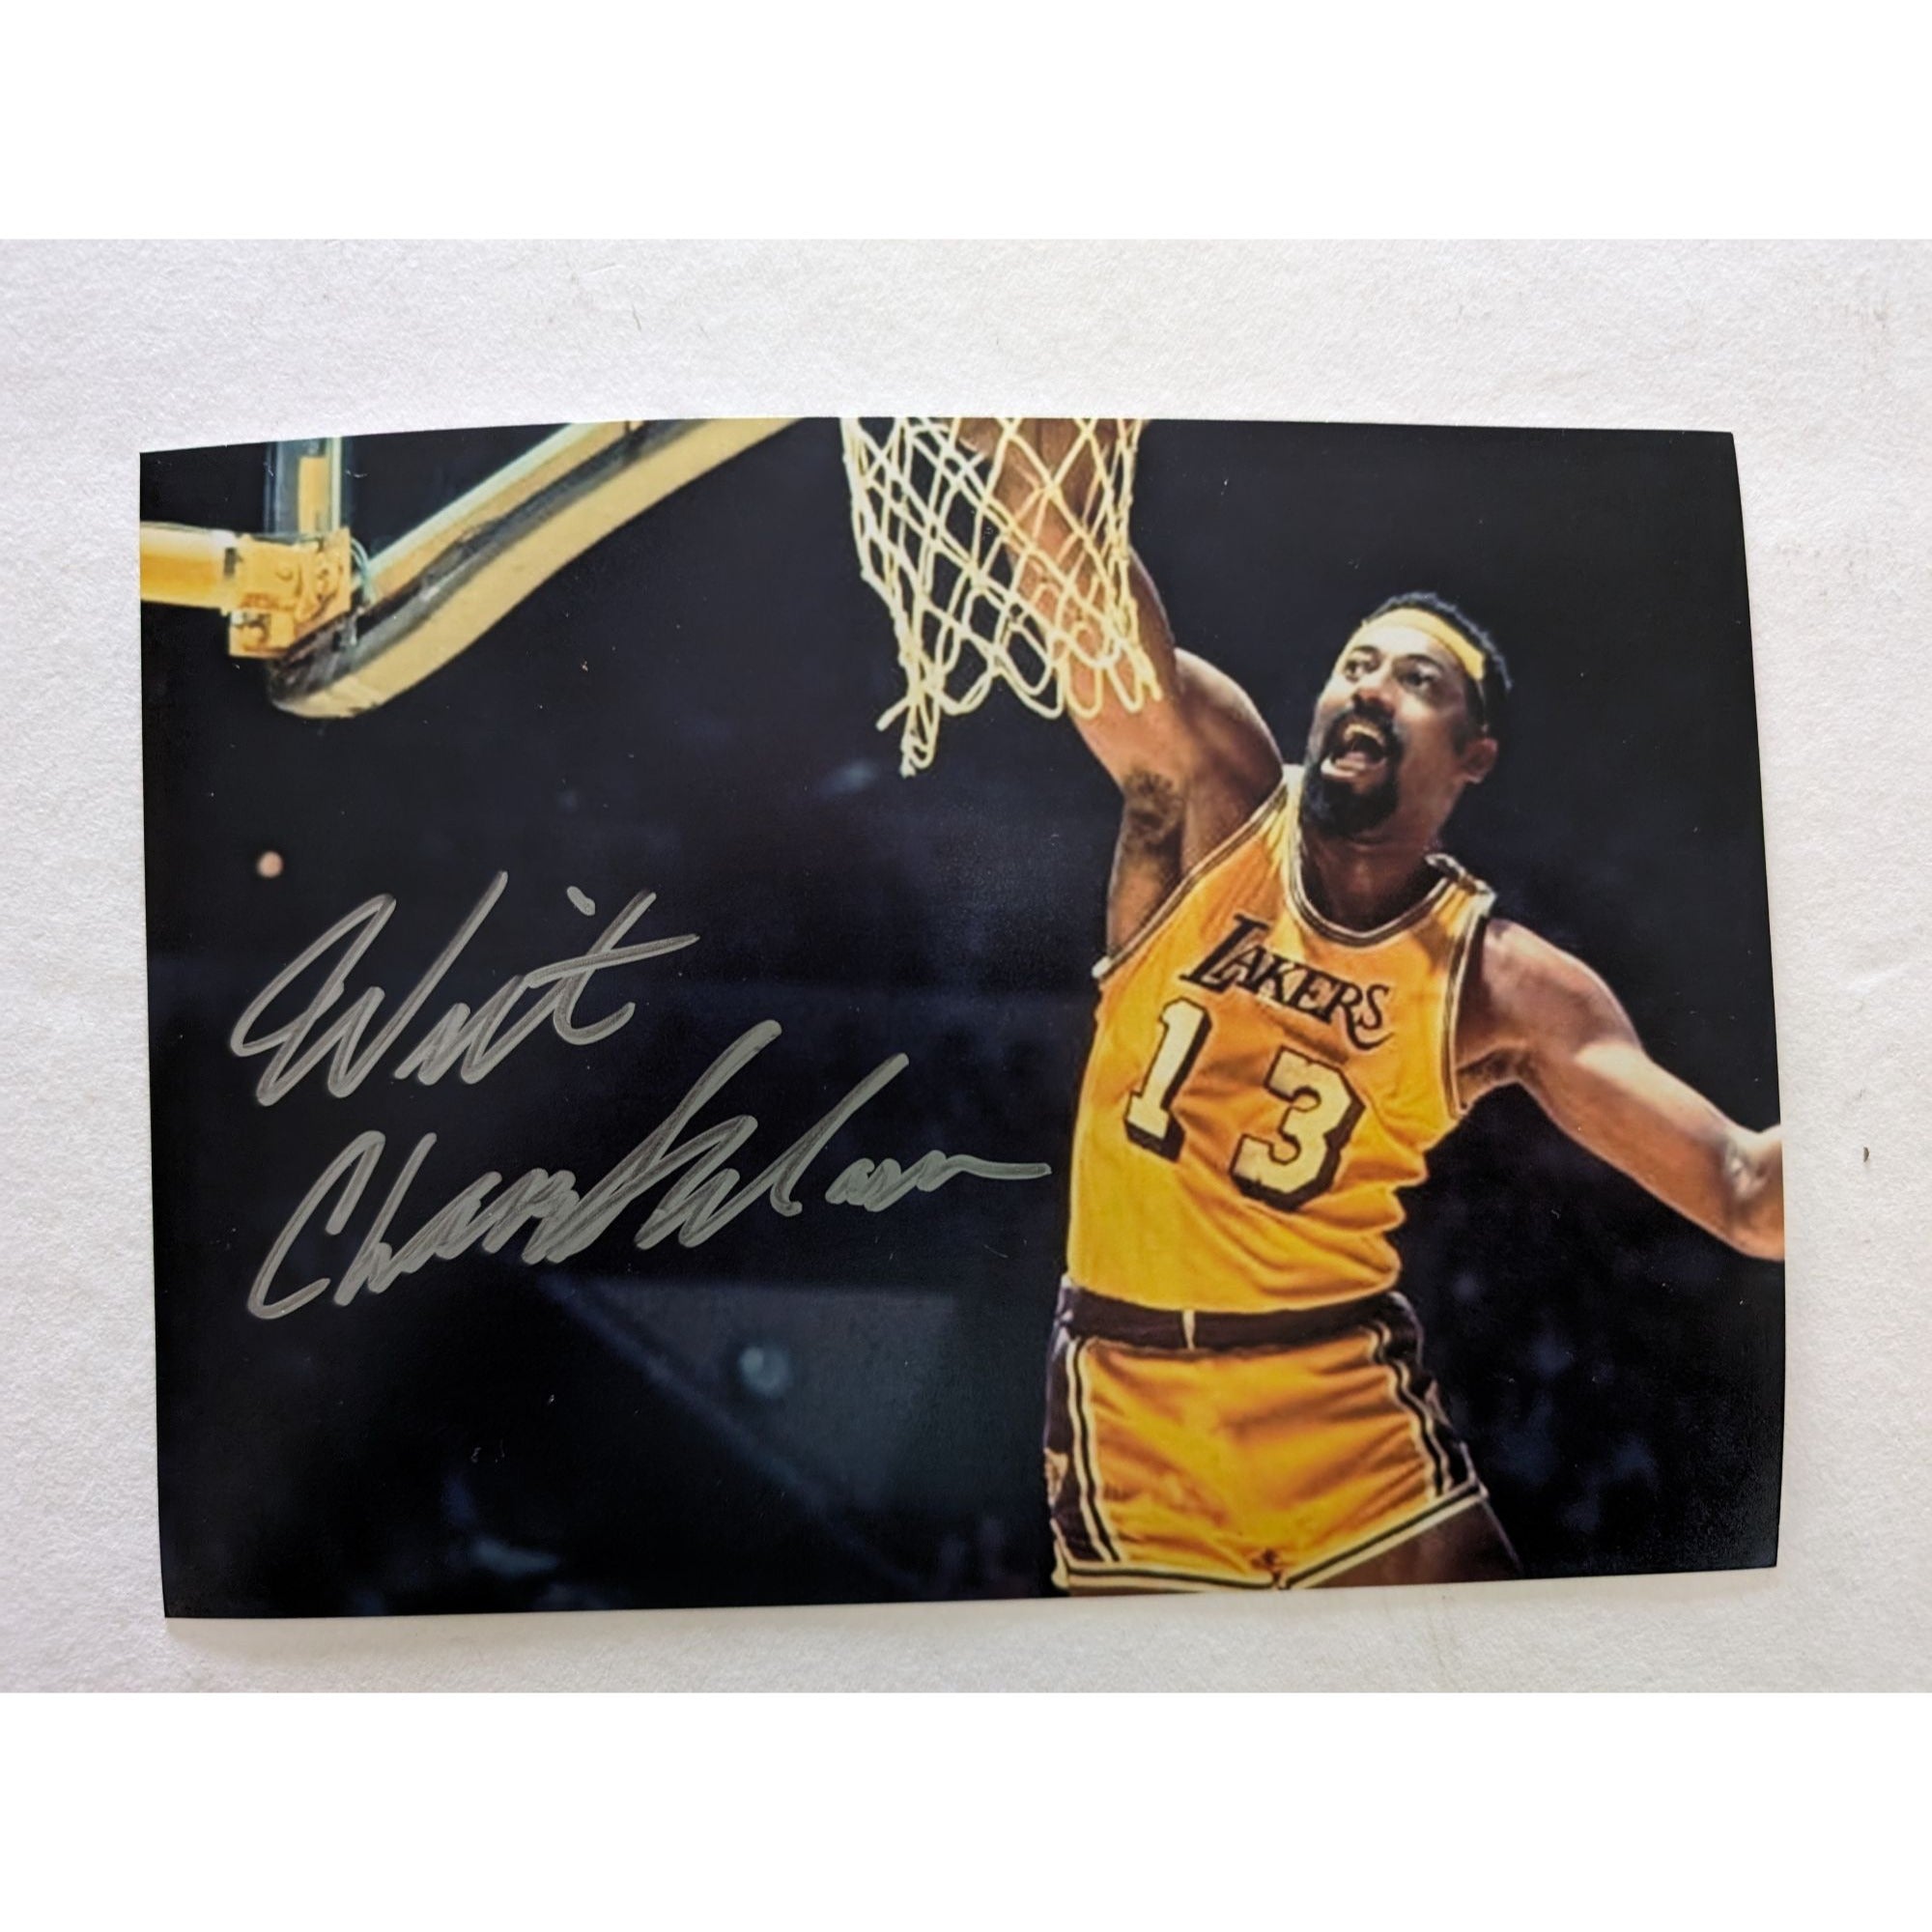 Wilt Chamberlain 5 x 7 Los Angeles Lakers photo signed